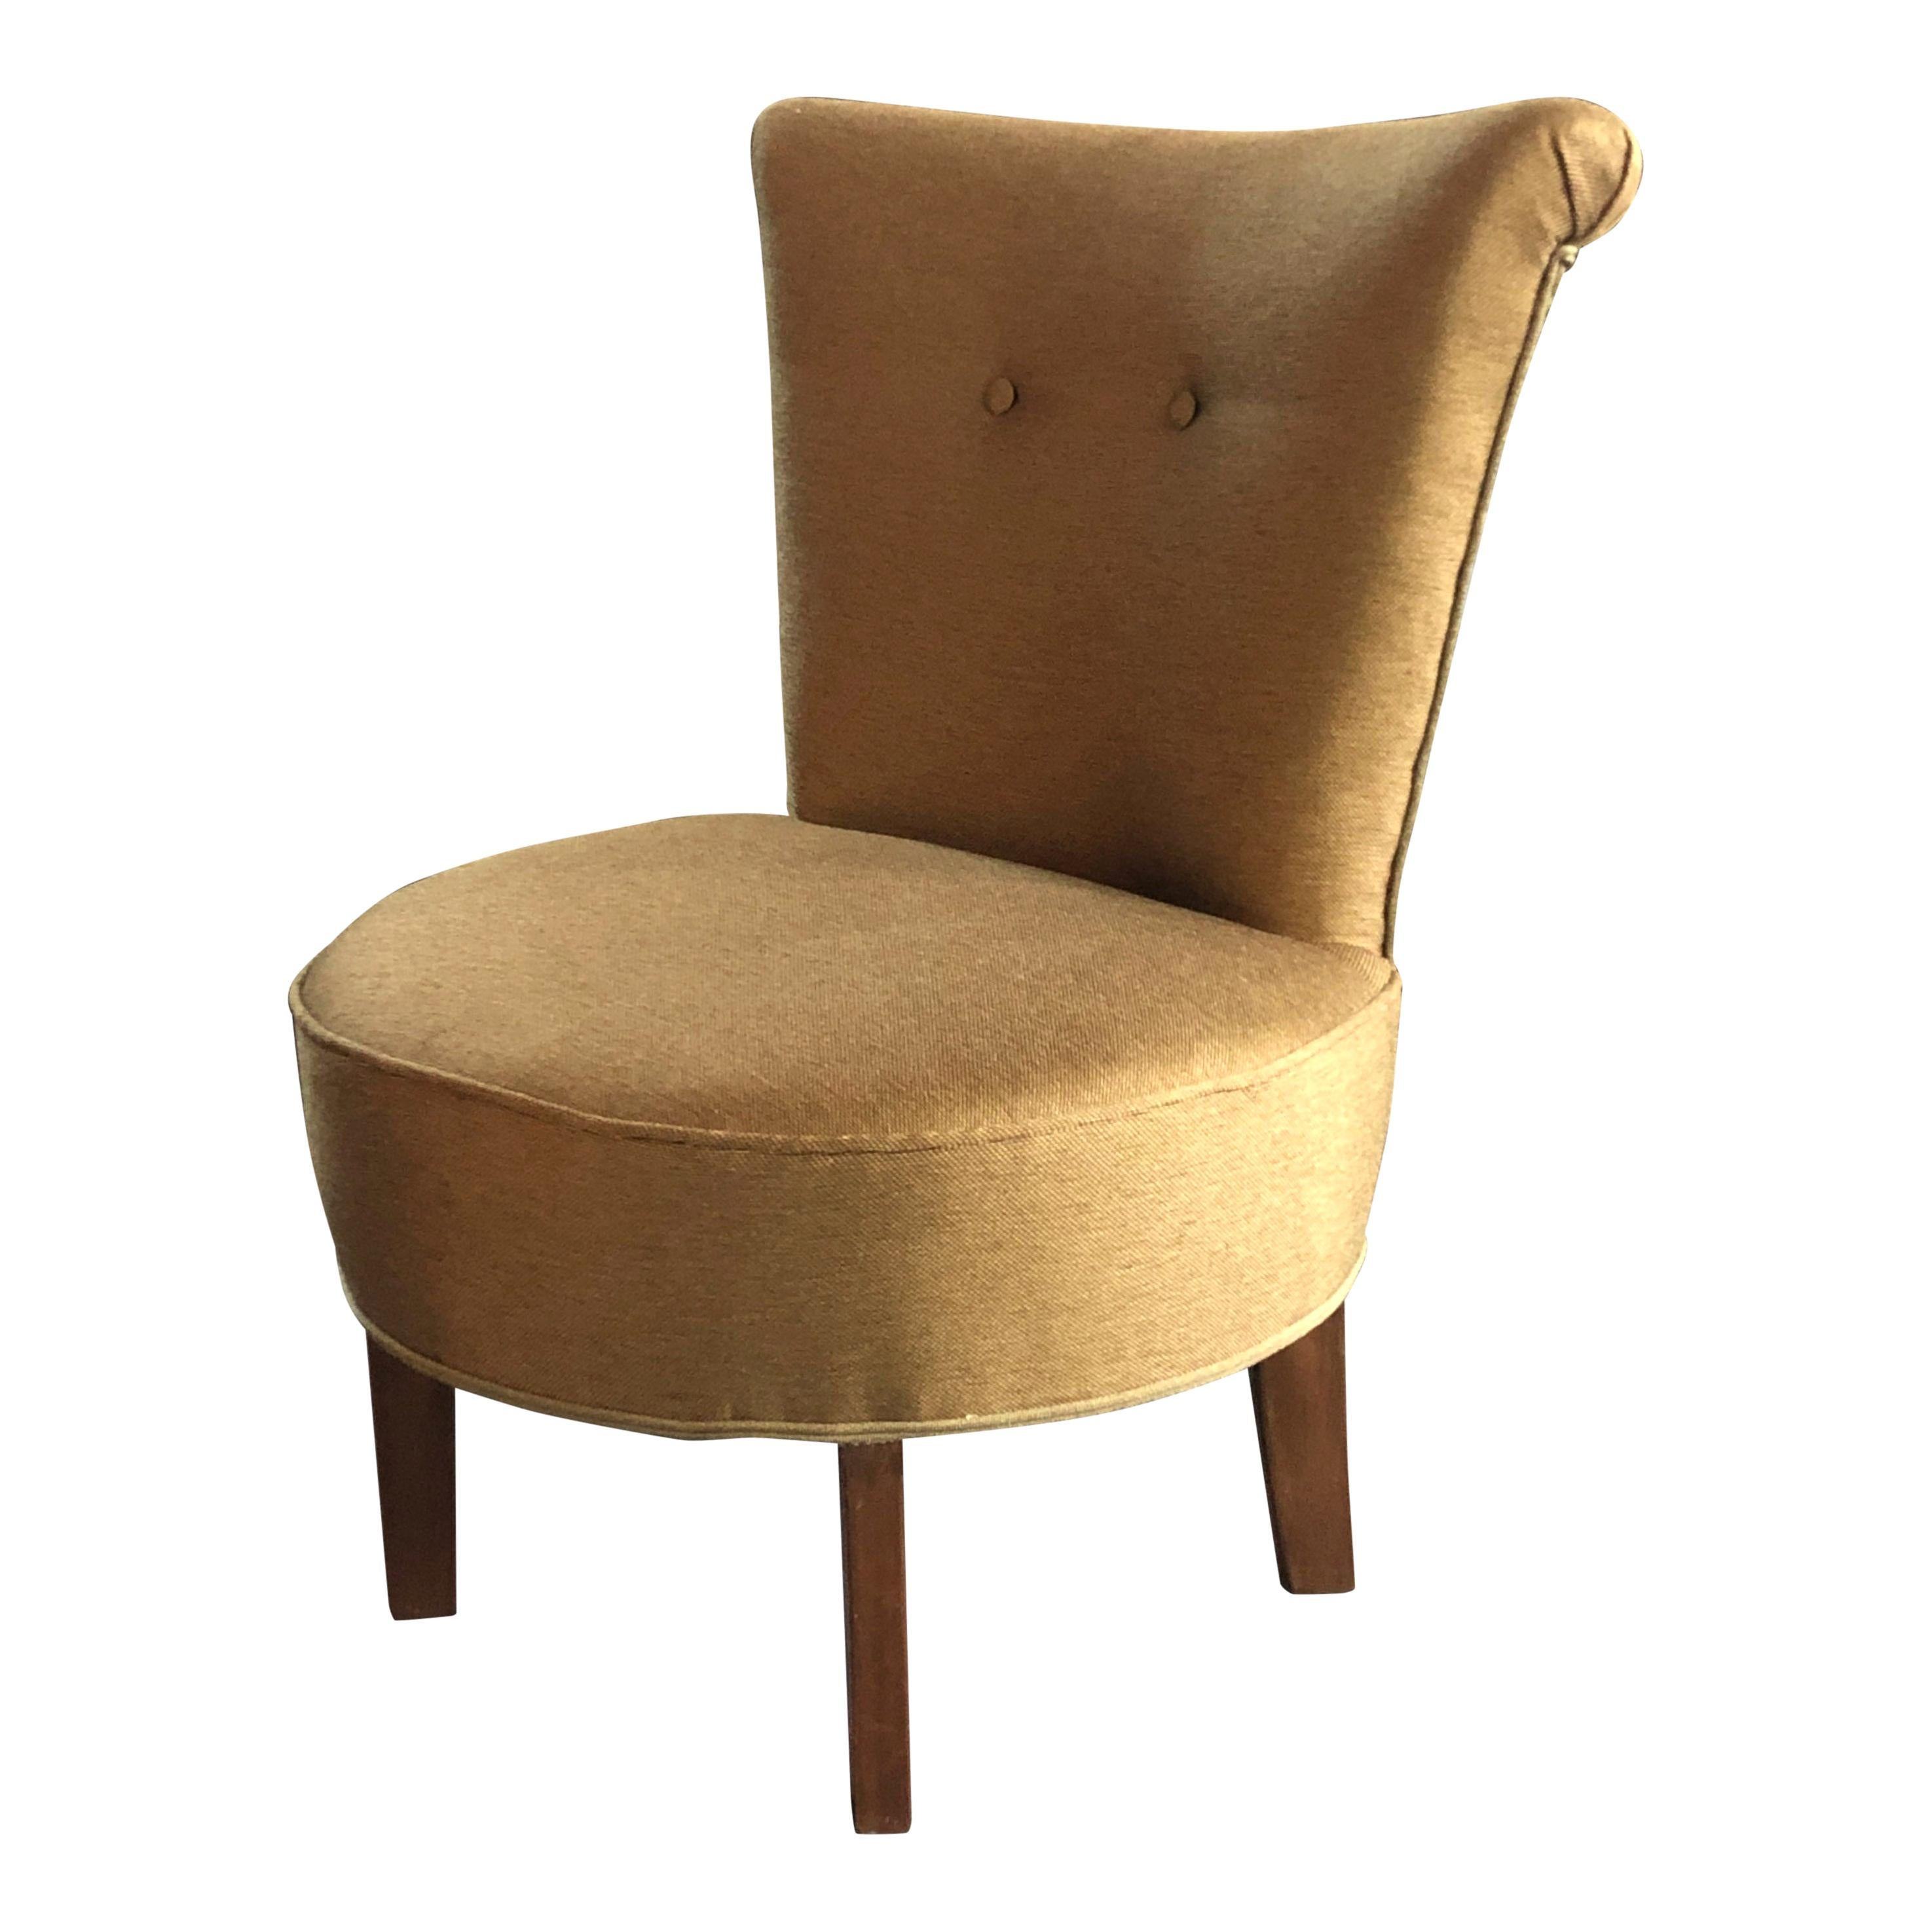 Club Chair with Gold Coloured Fabric Pierre Frey and Antique Kuba Cloth, 1950 For Sale